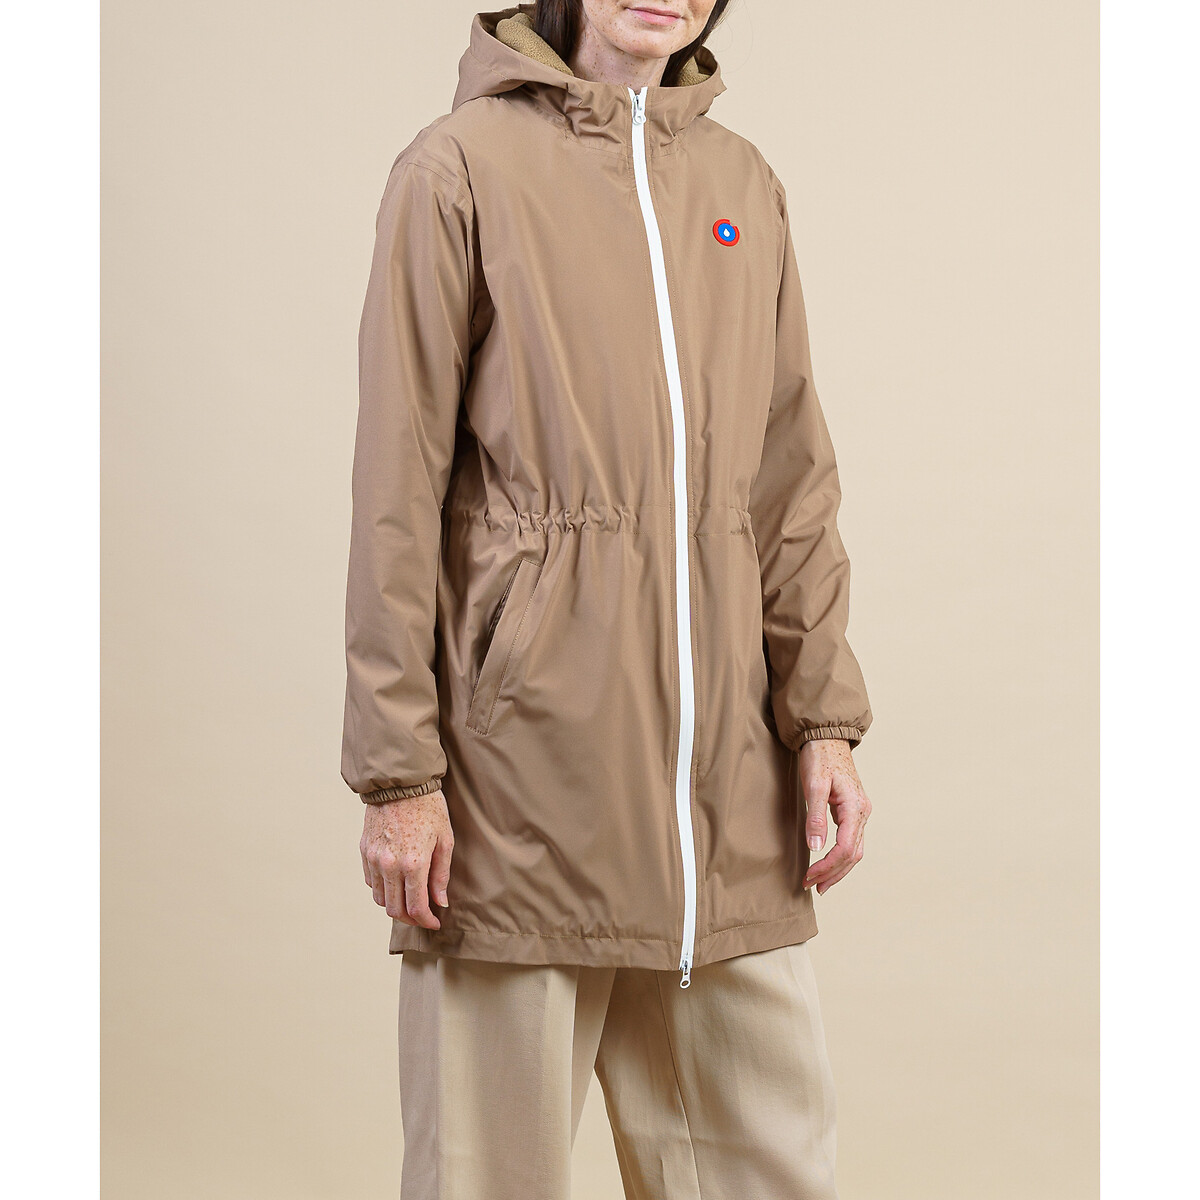 Unisex Pompidou Recycled Parka with Fleece Lining, Mid-Length